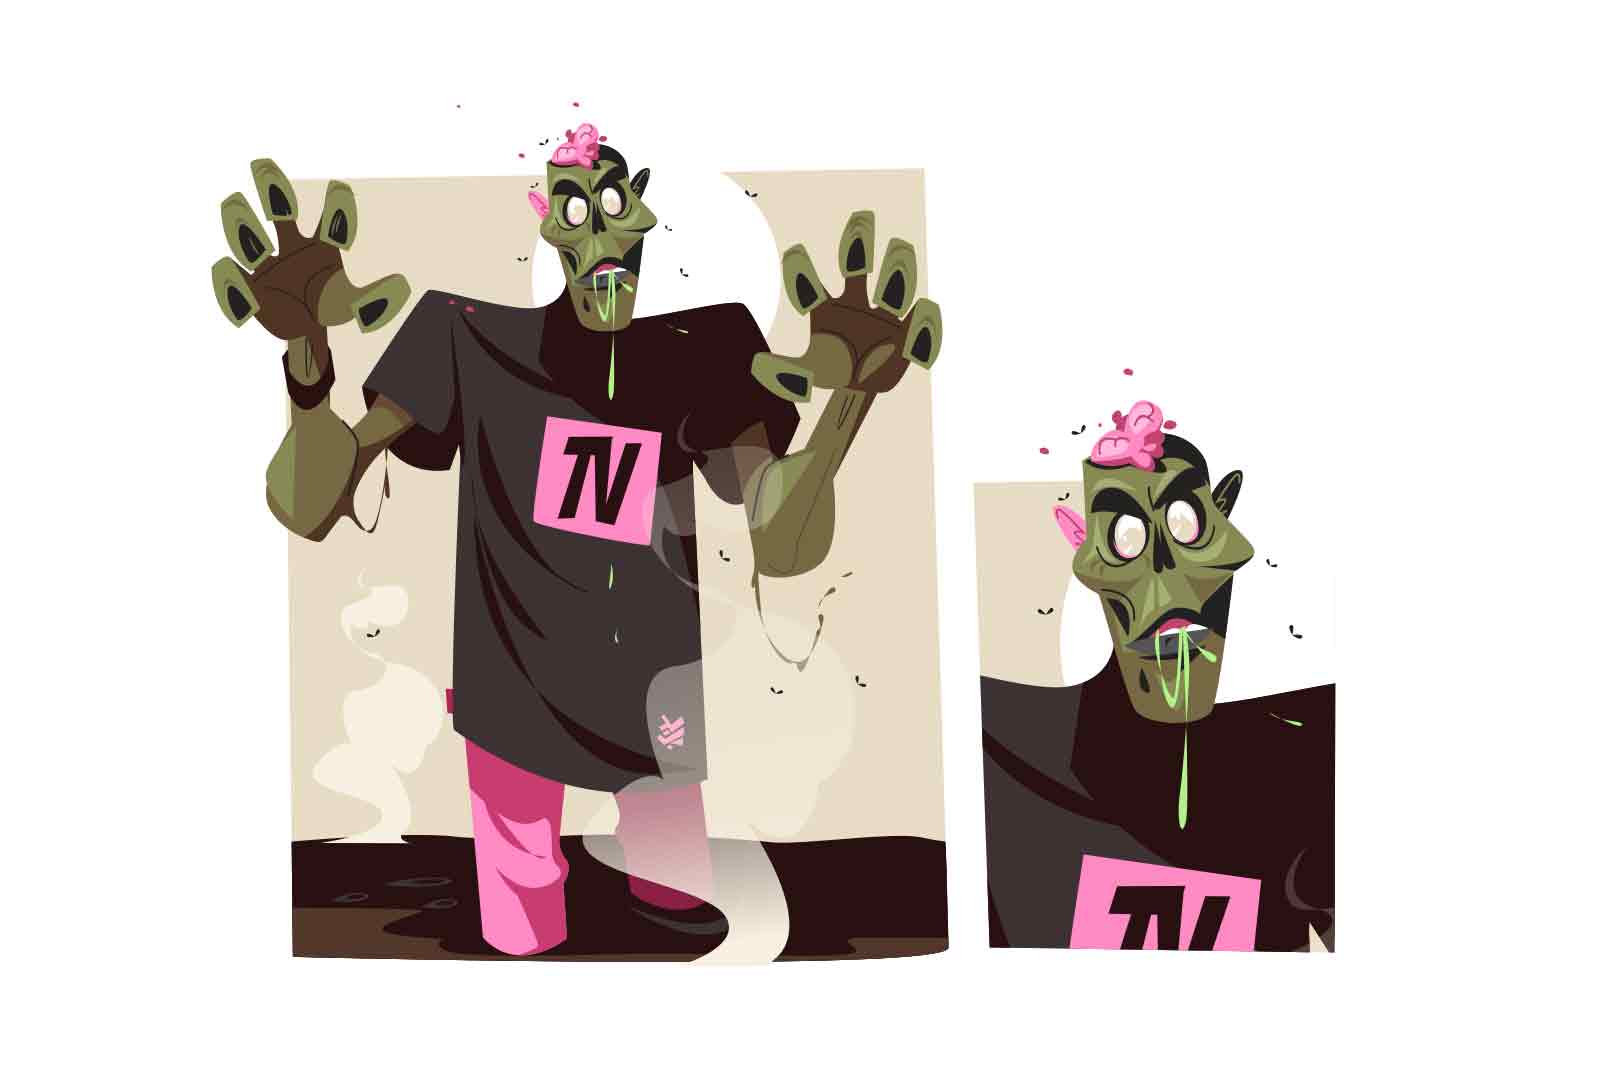 Zombie with arms and brain, vector illustration. A green-skinned, pink-haired creature with a drooling mouth and a pink brain on its head.